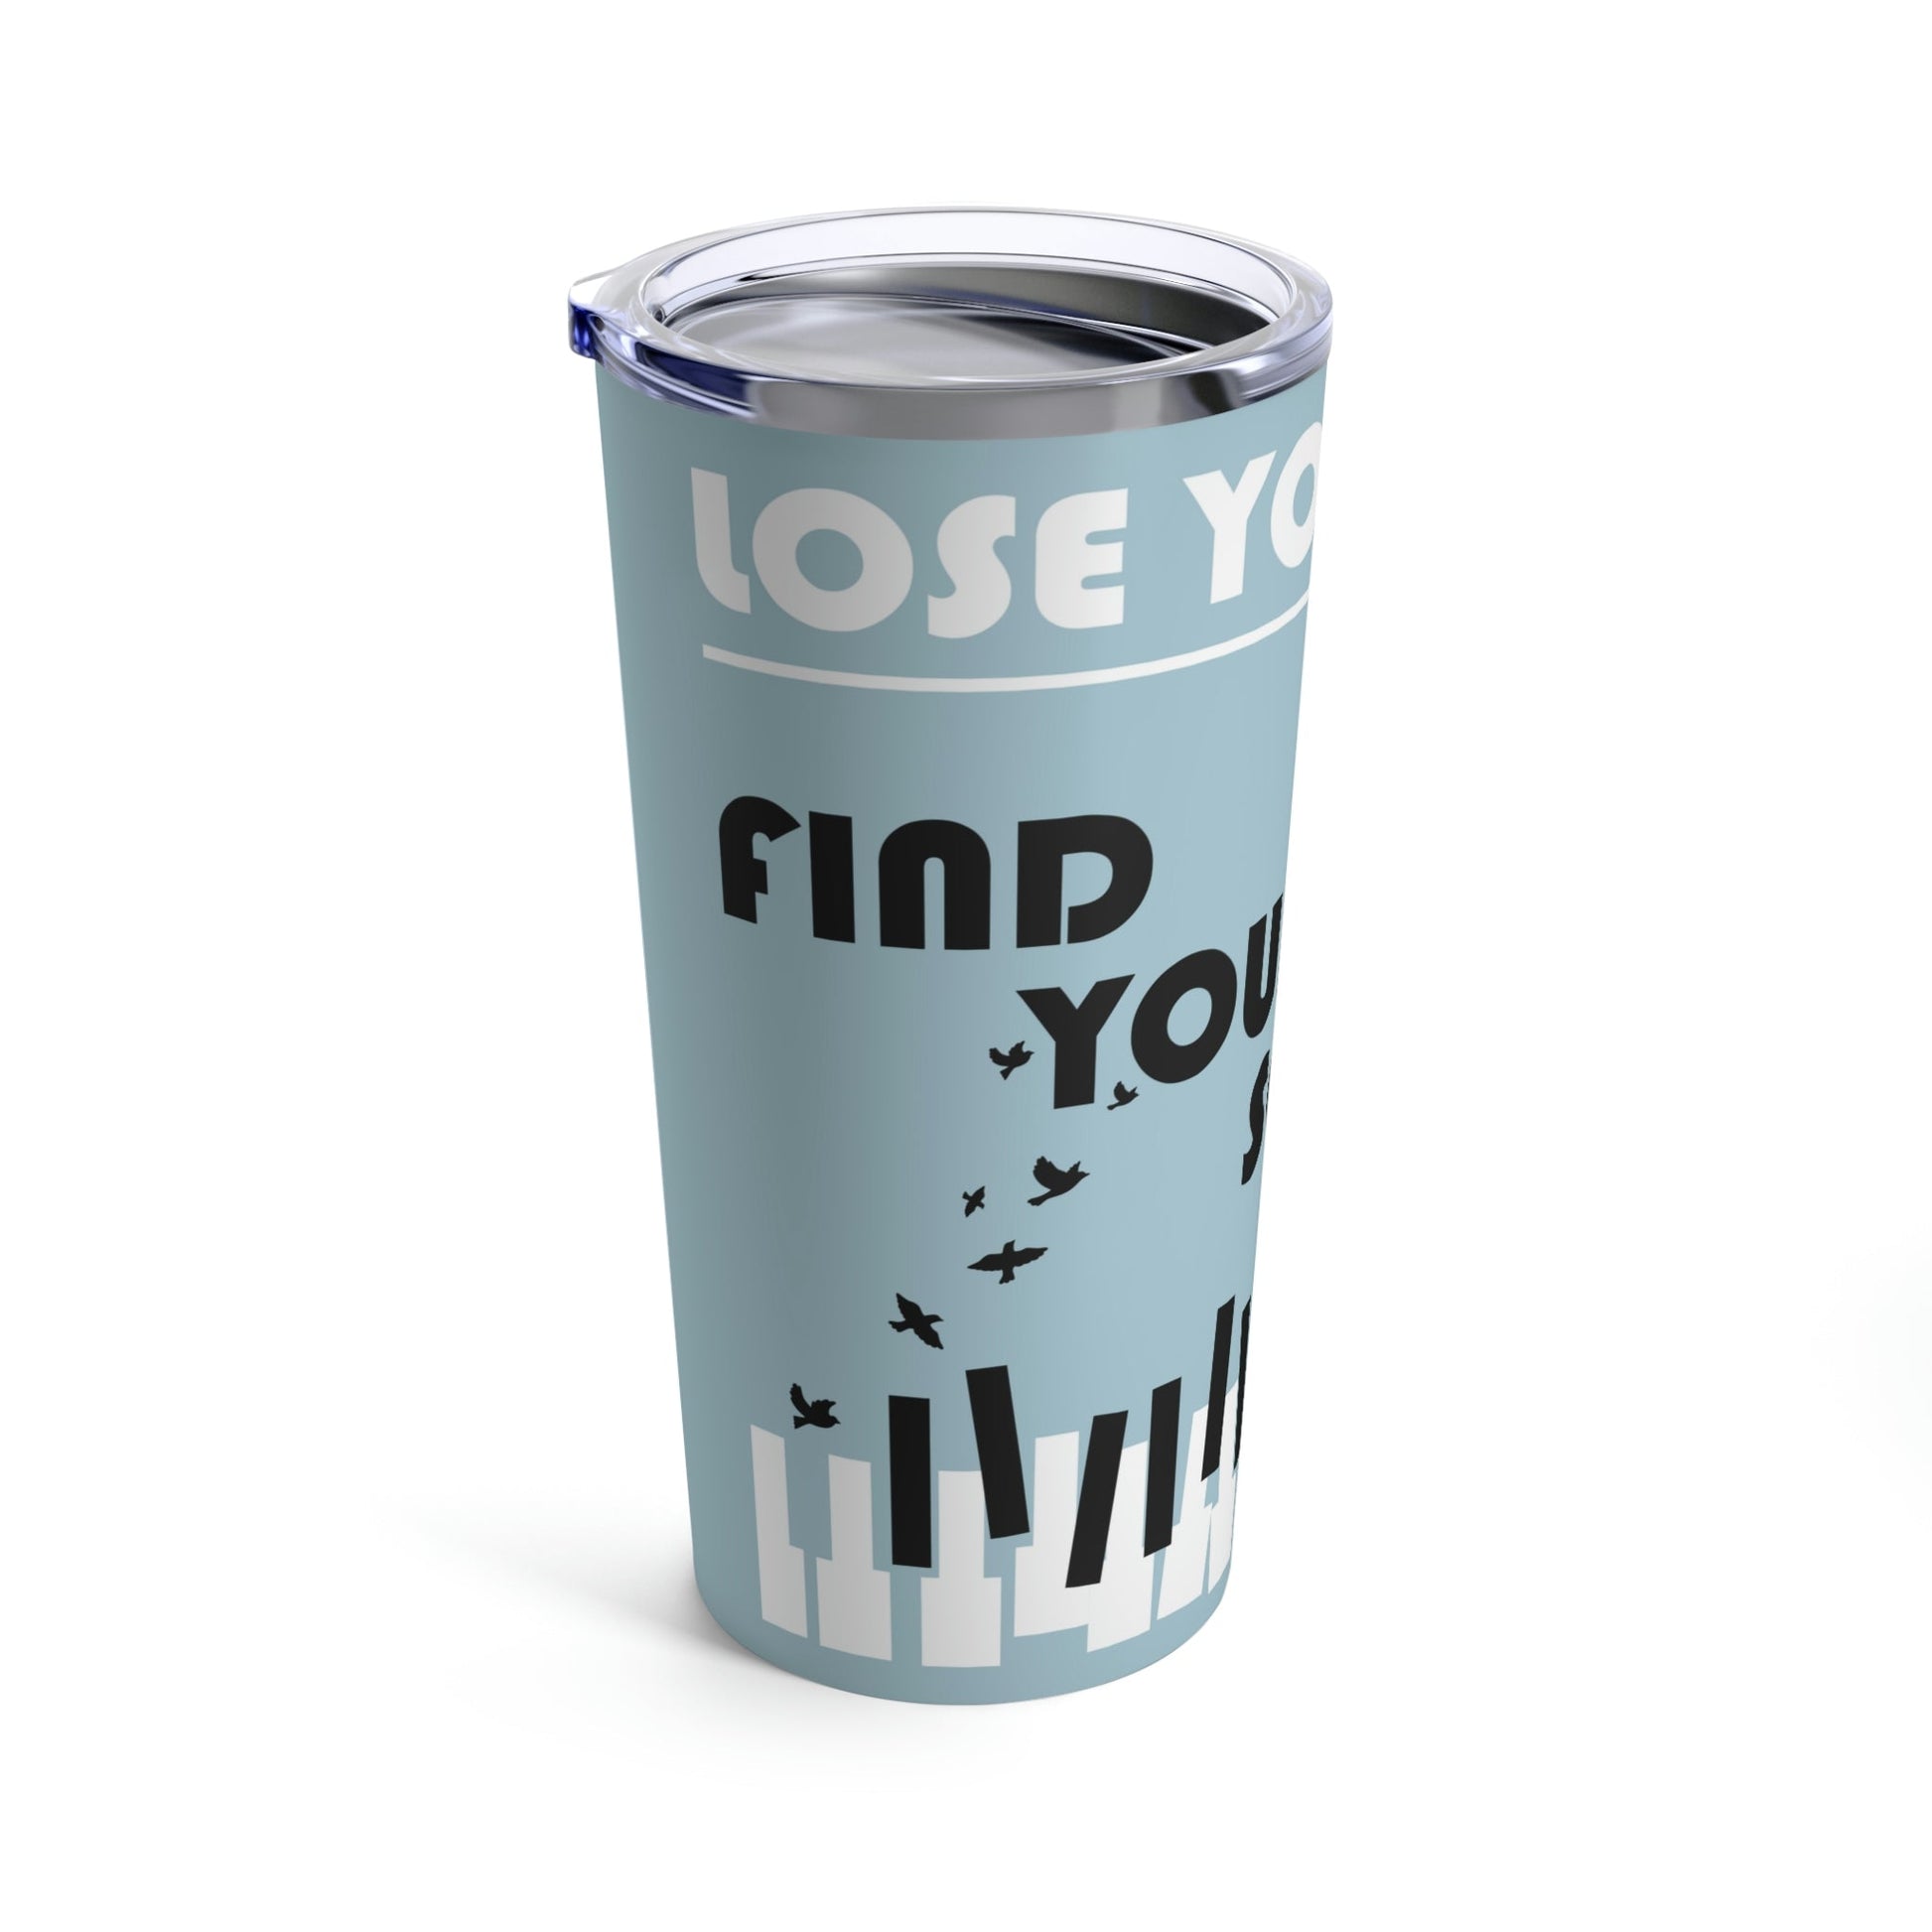 Lose Your Mind Find your Soul Flying birds Piano Keys Music Art Stainless Steel Hot or Cold Vacuum Tumbler 20oz Ichaku [Perfect Gifts Selection]